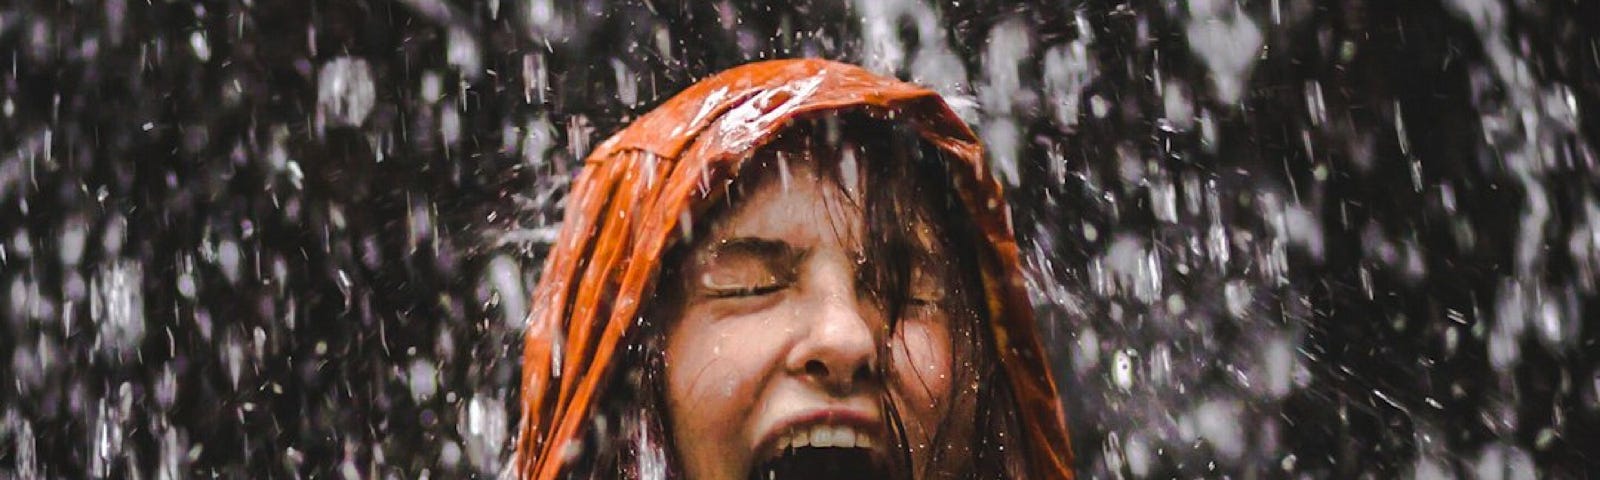 picture of a girl getting soaked in the rain without an umbrella